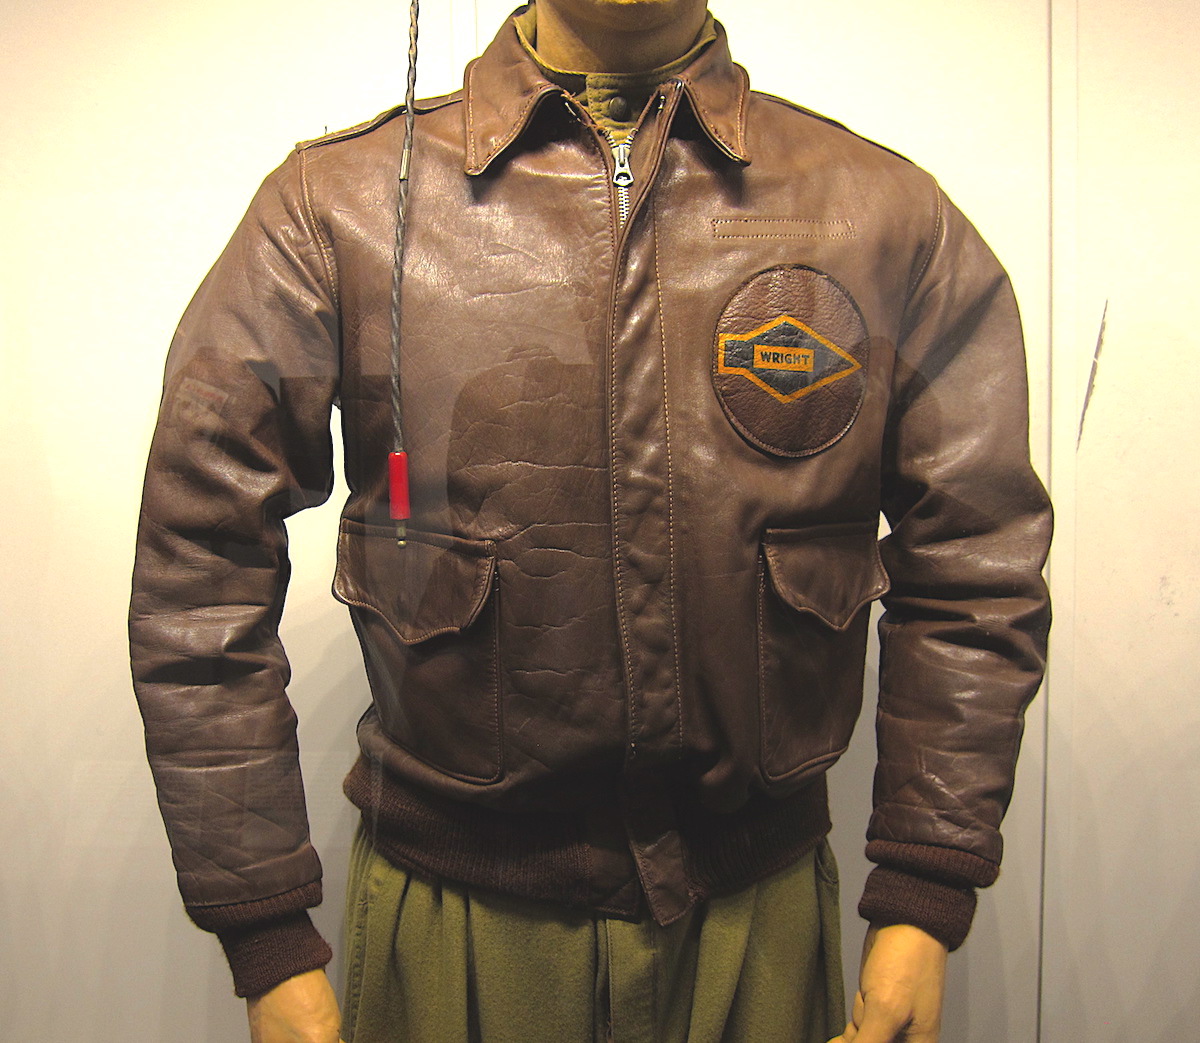 Looking for Wright Field arrowhead patch | Vintage Leather Jackets Forum